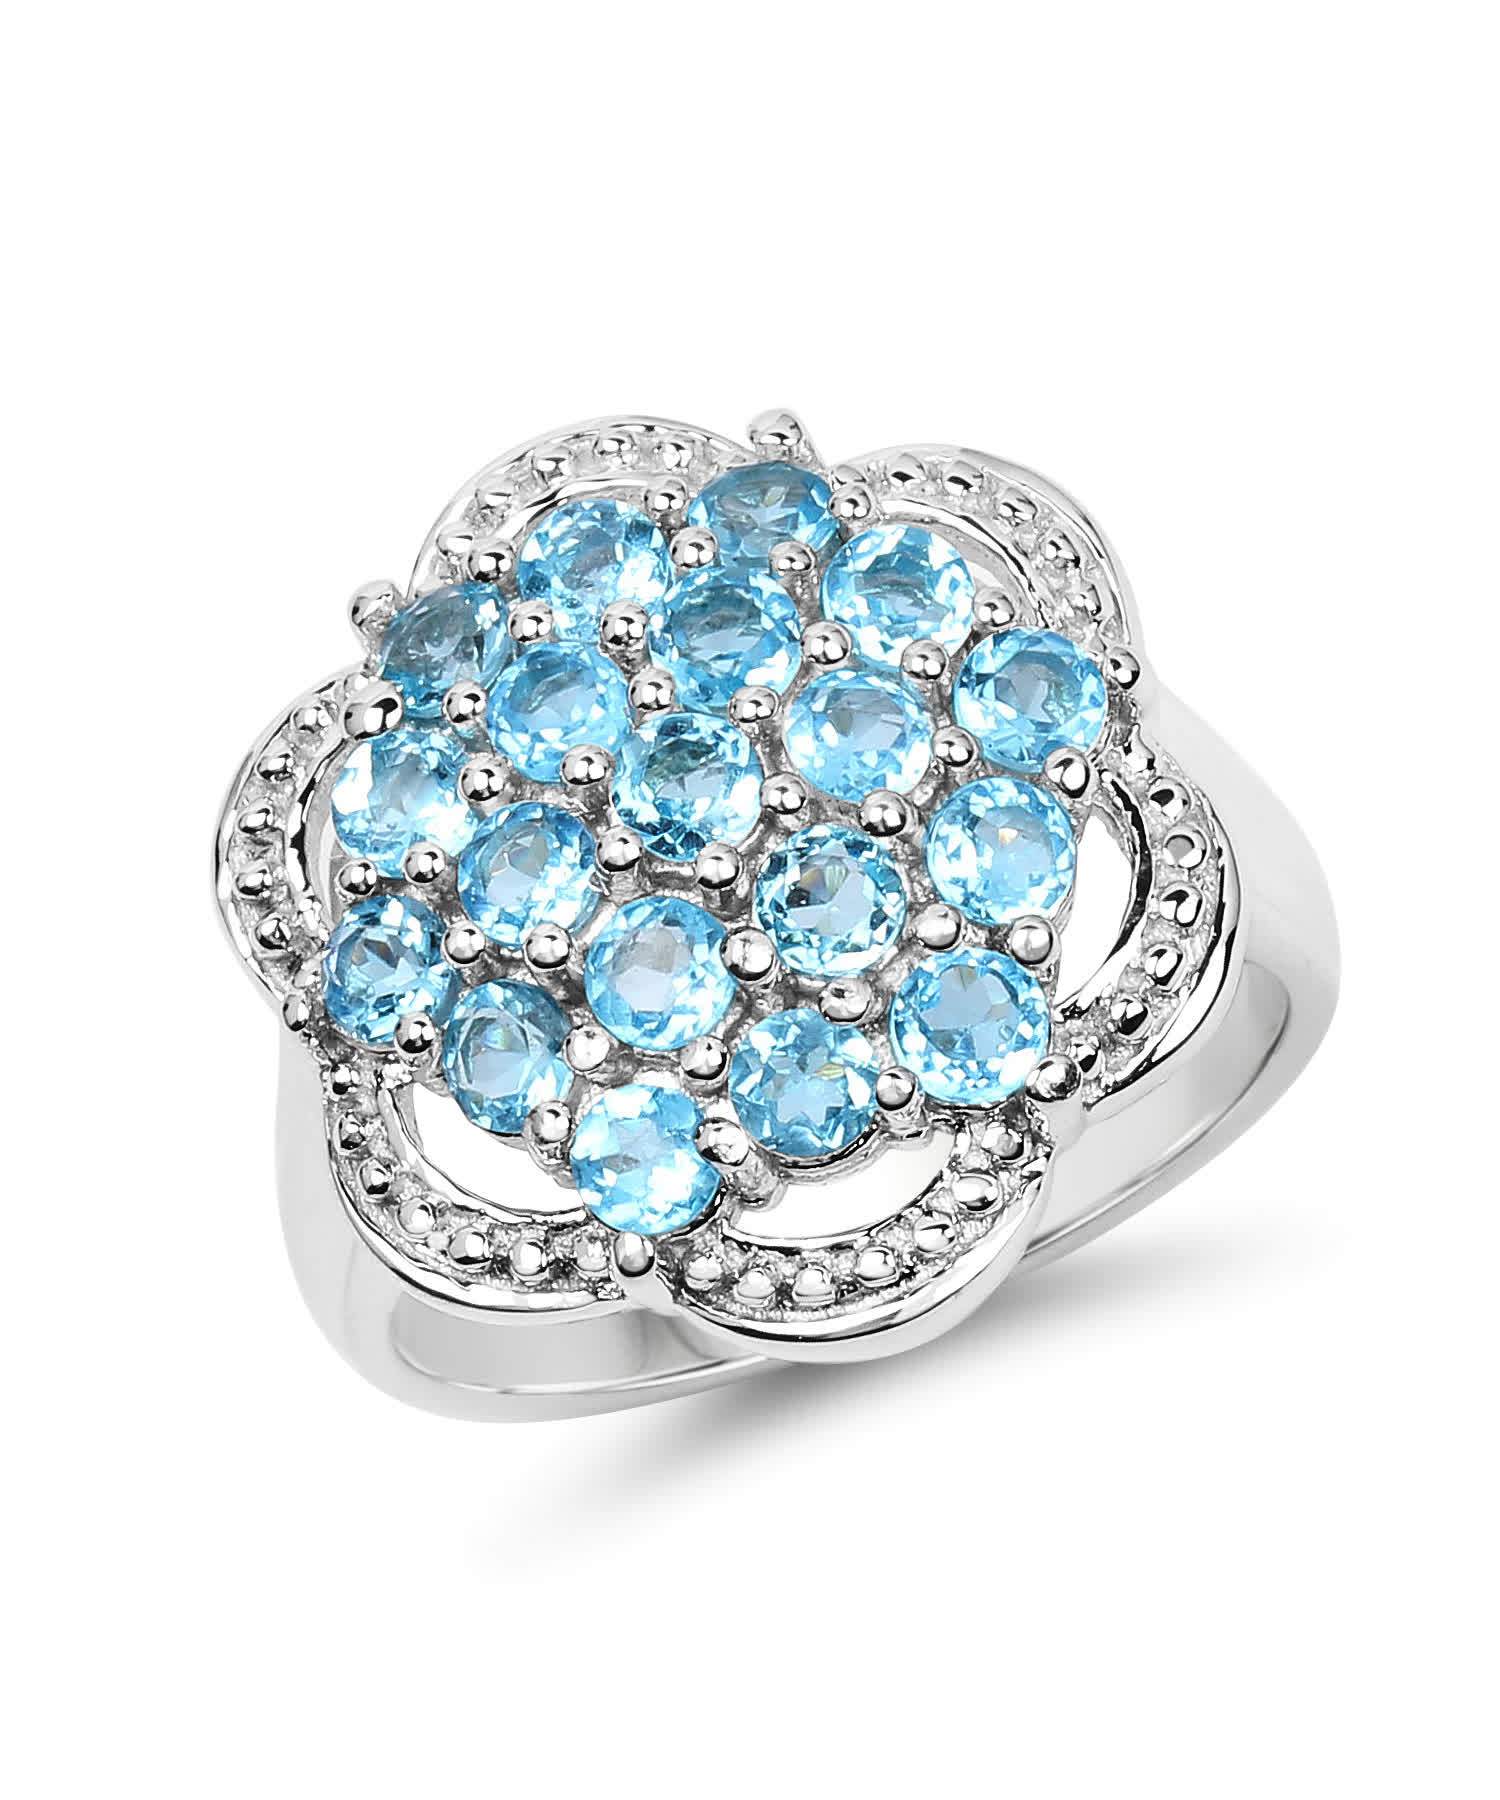 1.90ctw Natural Swiss Blue Topaz Rhodium Plated 925 Sterling Silver Cocktail Ring View 1